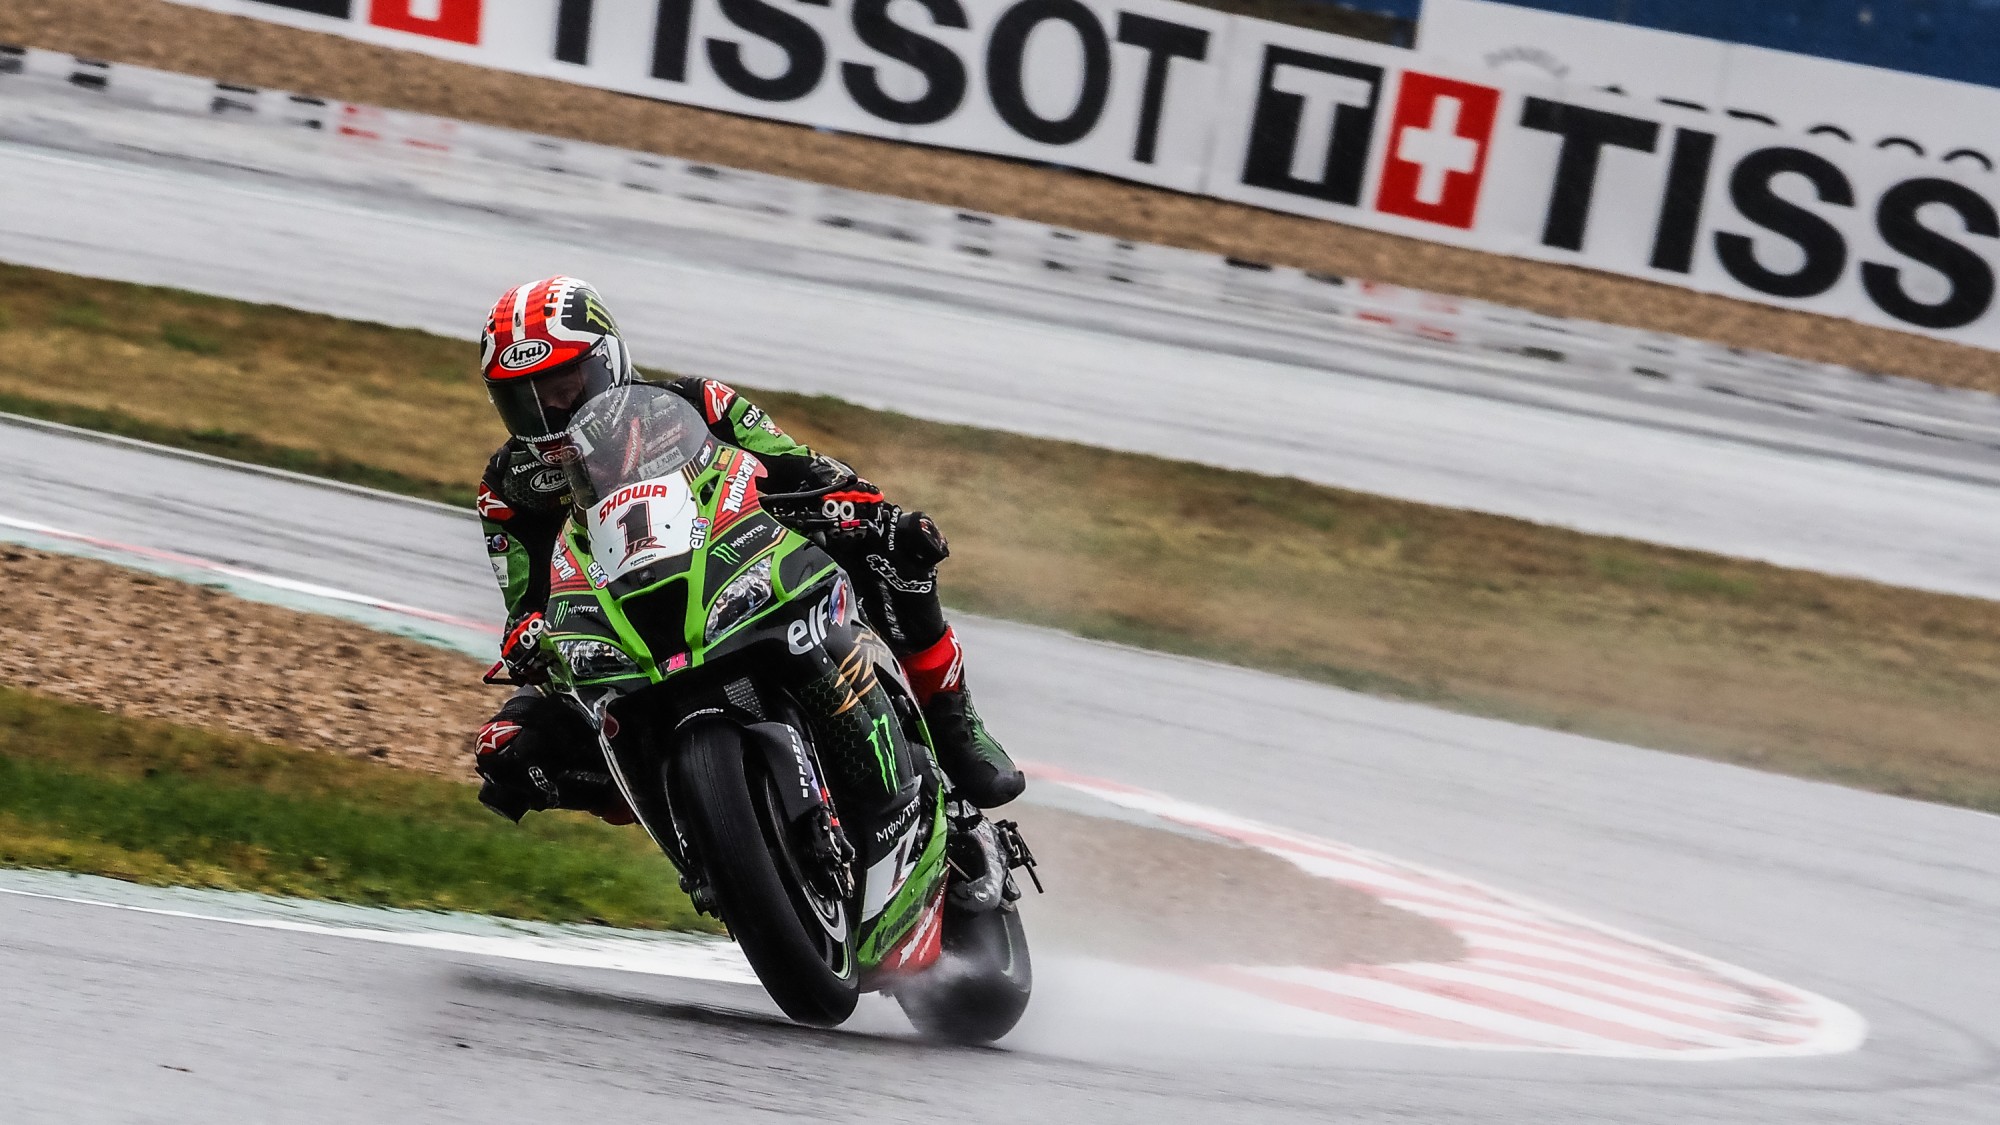 Jonathan Rea first in wet FP1 at Magny-Cours as Caricasulo crashes